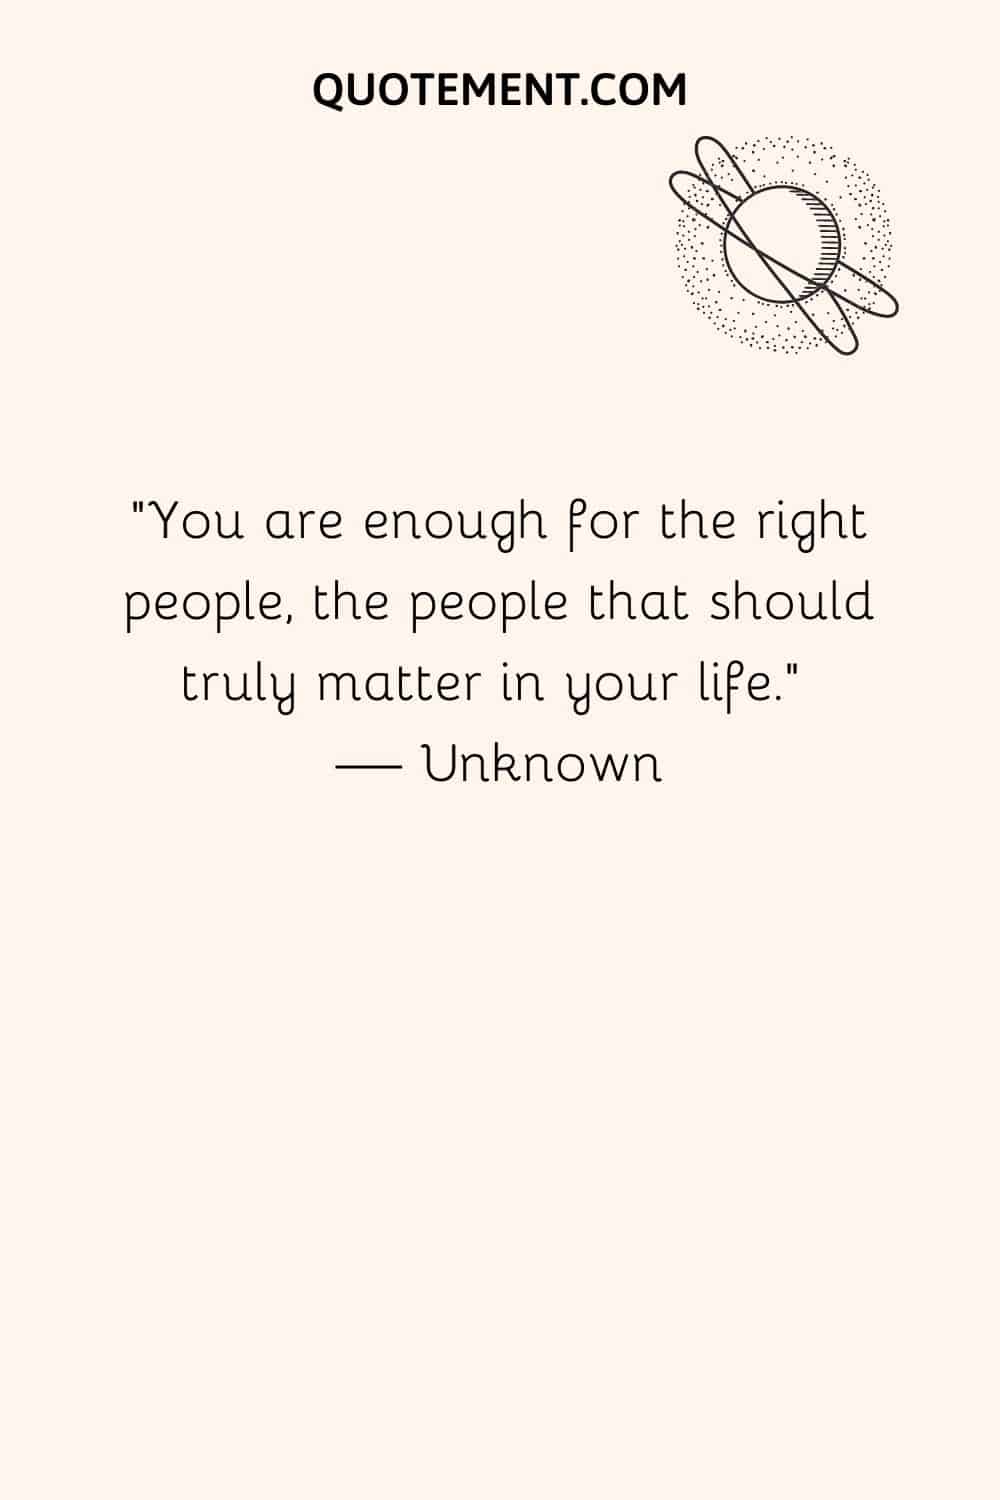 You are enough for the right people, the people that should truly matter in your life